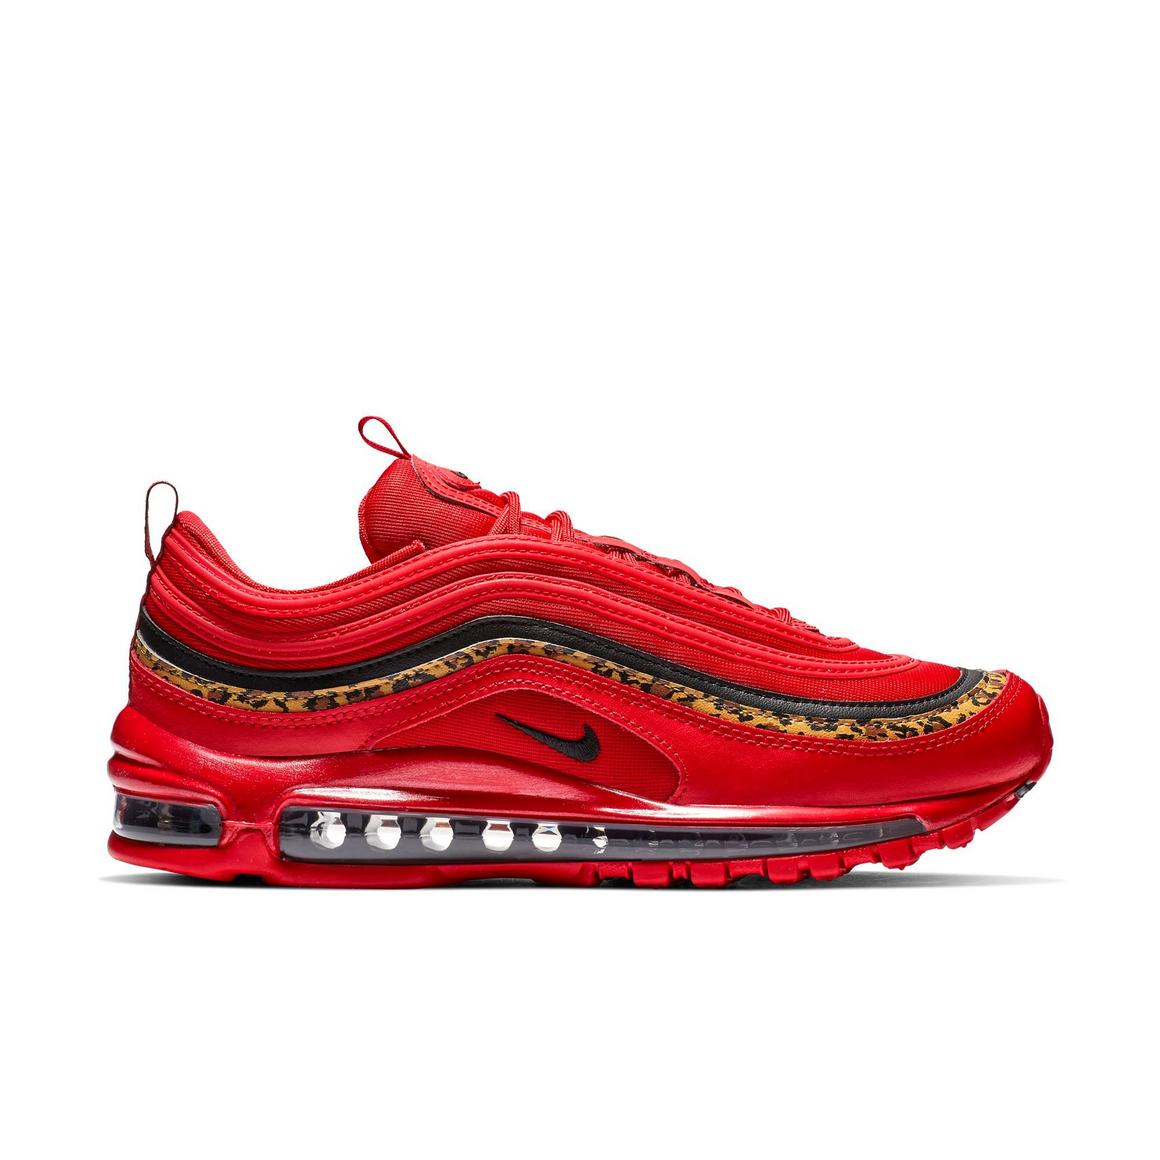 red air max 97 with leopard